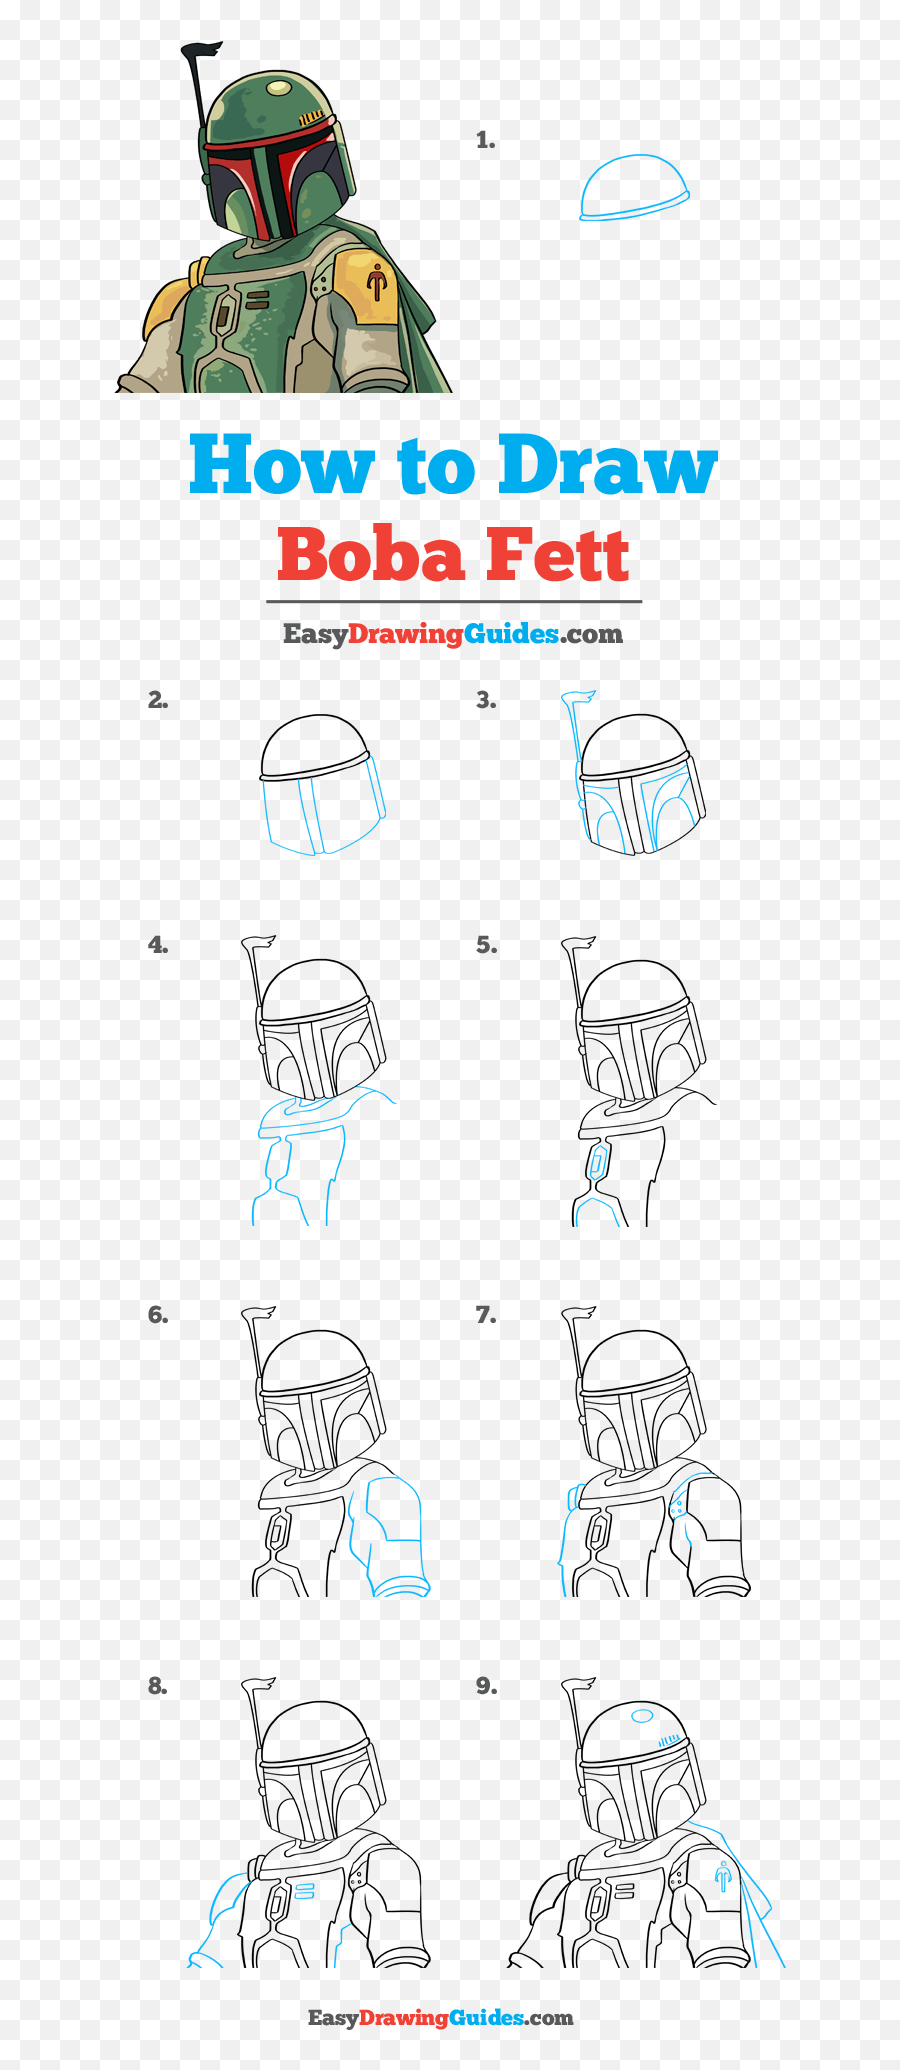 How To Draw Boba Fett - Really Easy Drawing Tutorial Boba Fett Drawing Step By Step Emoji,Boba Emoji